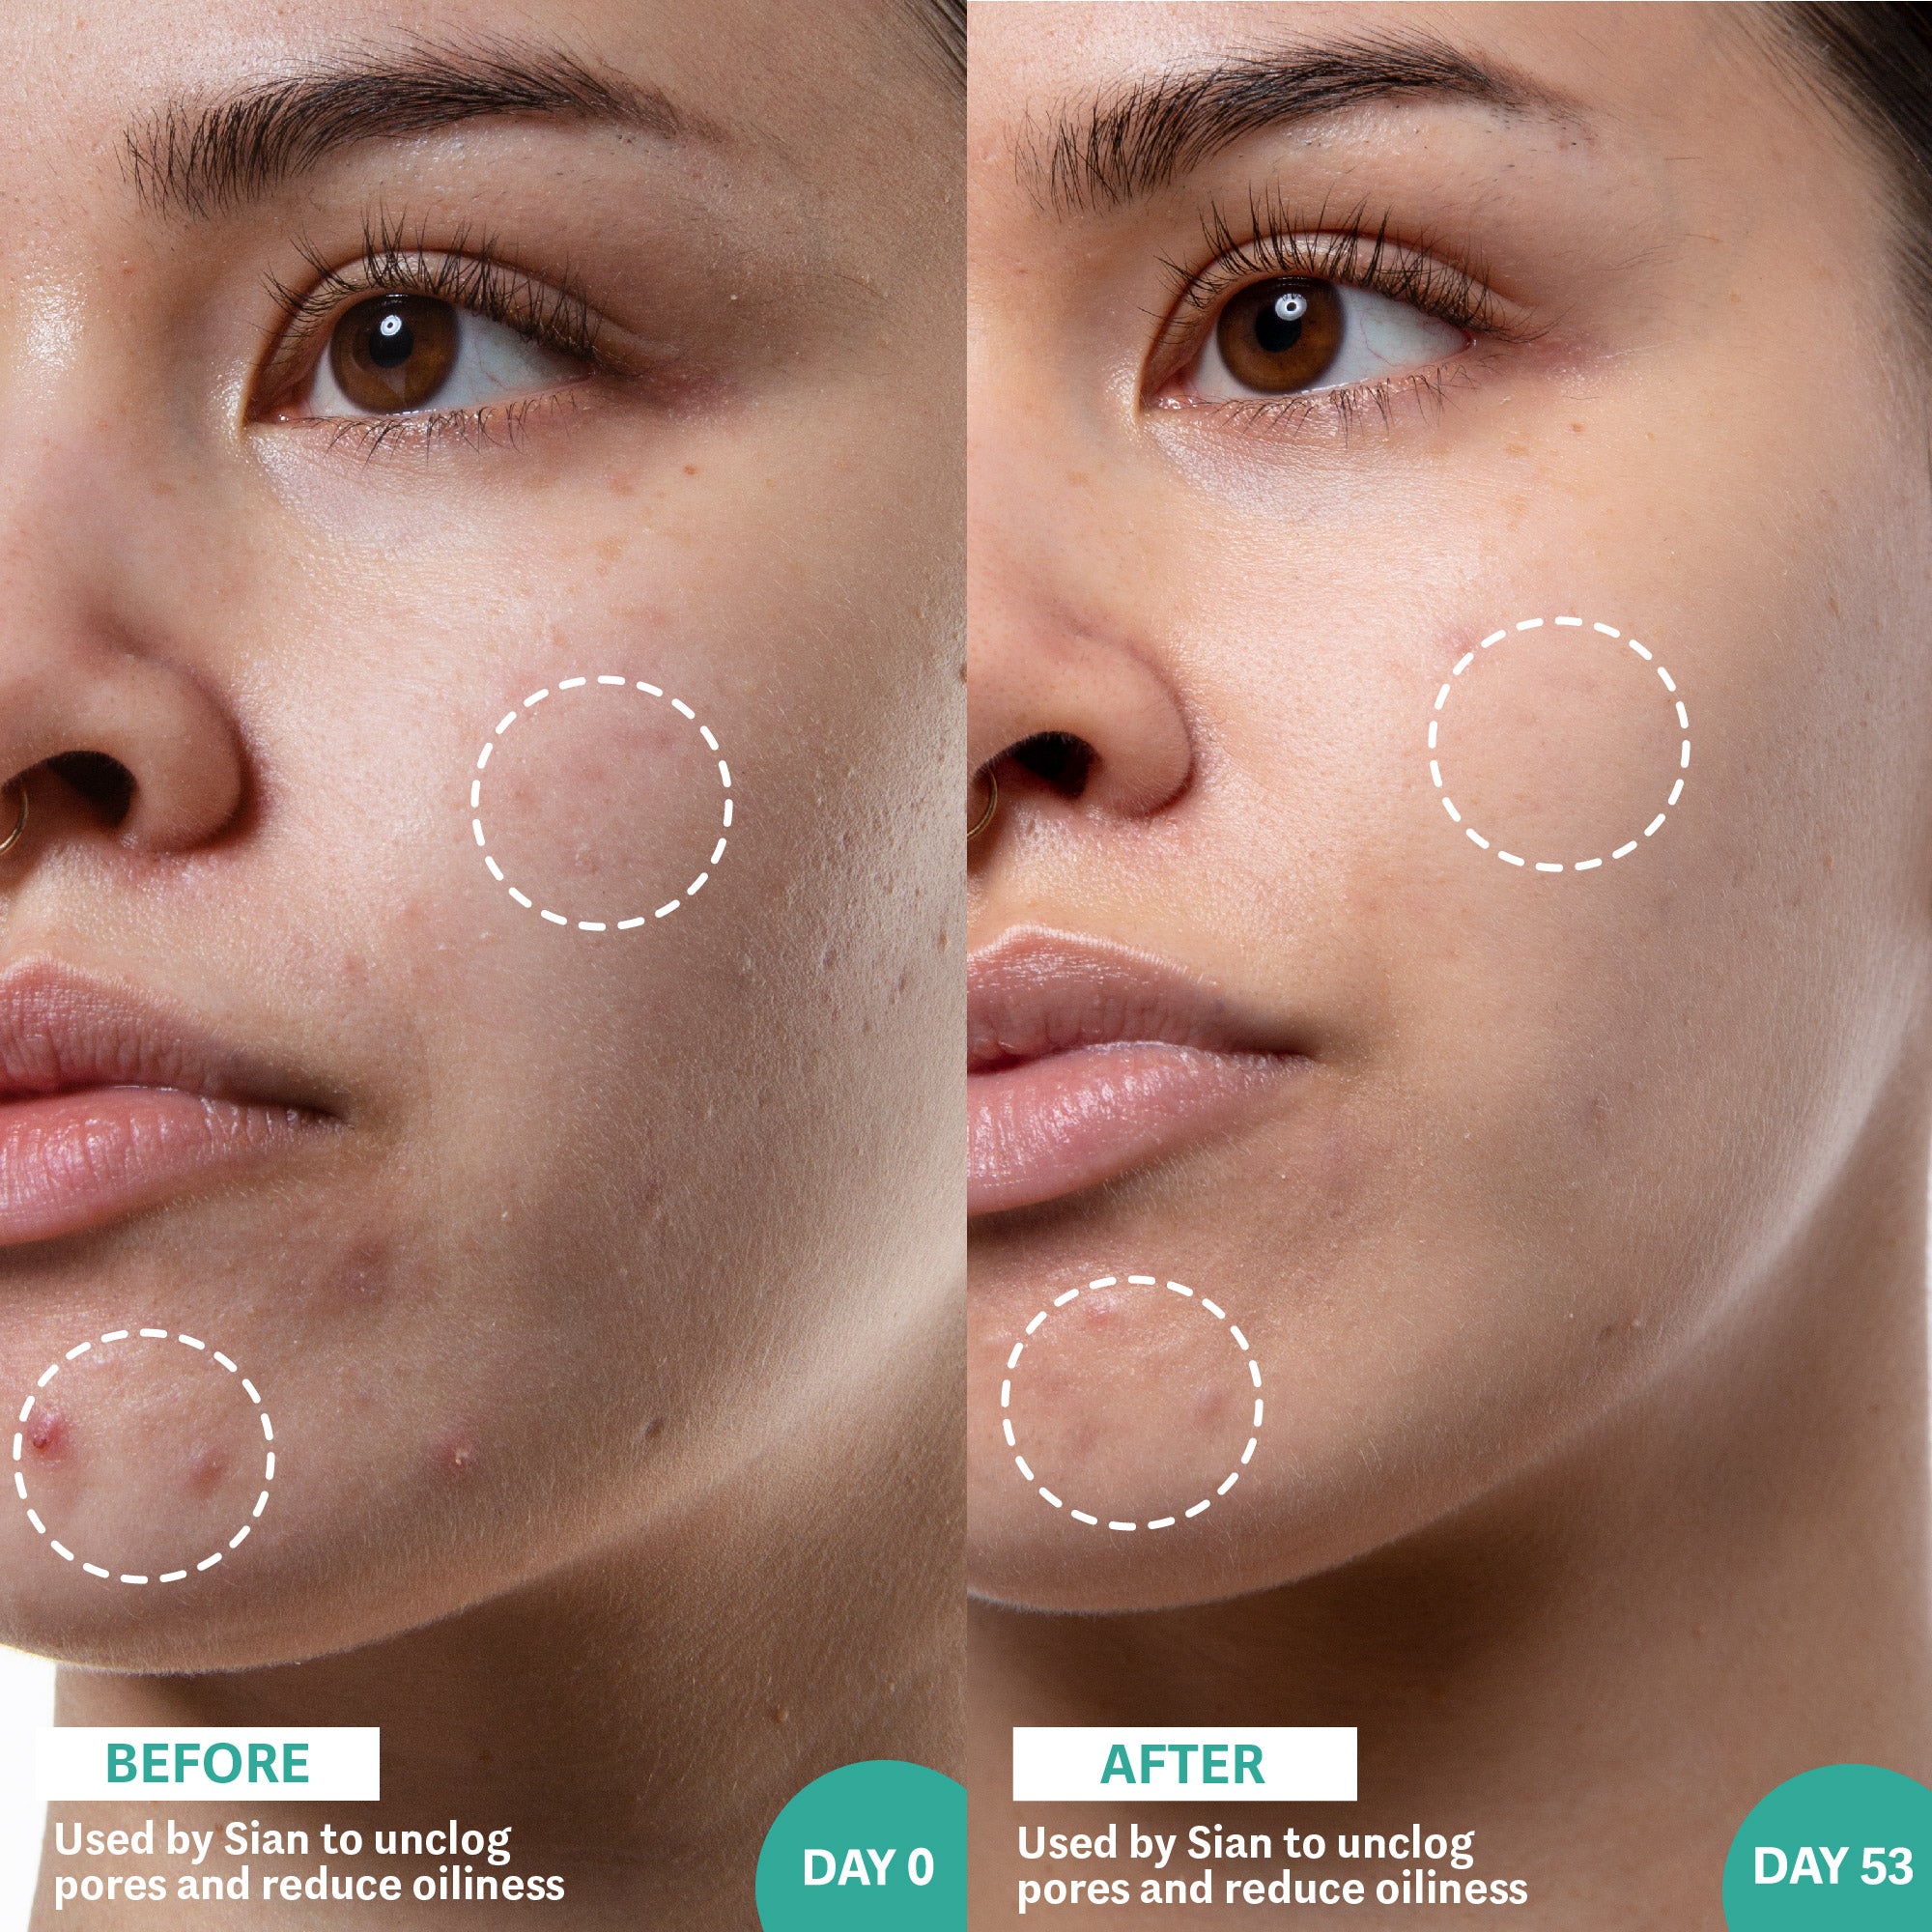 Before and After image of woman using Salicylic Acid and Sea Kelp product